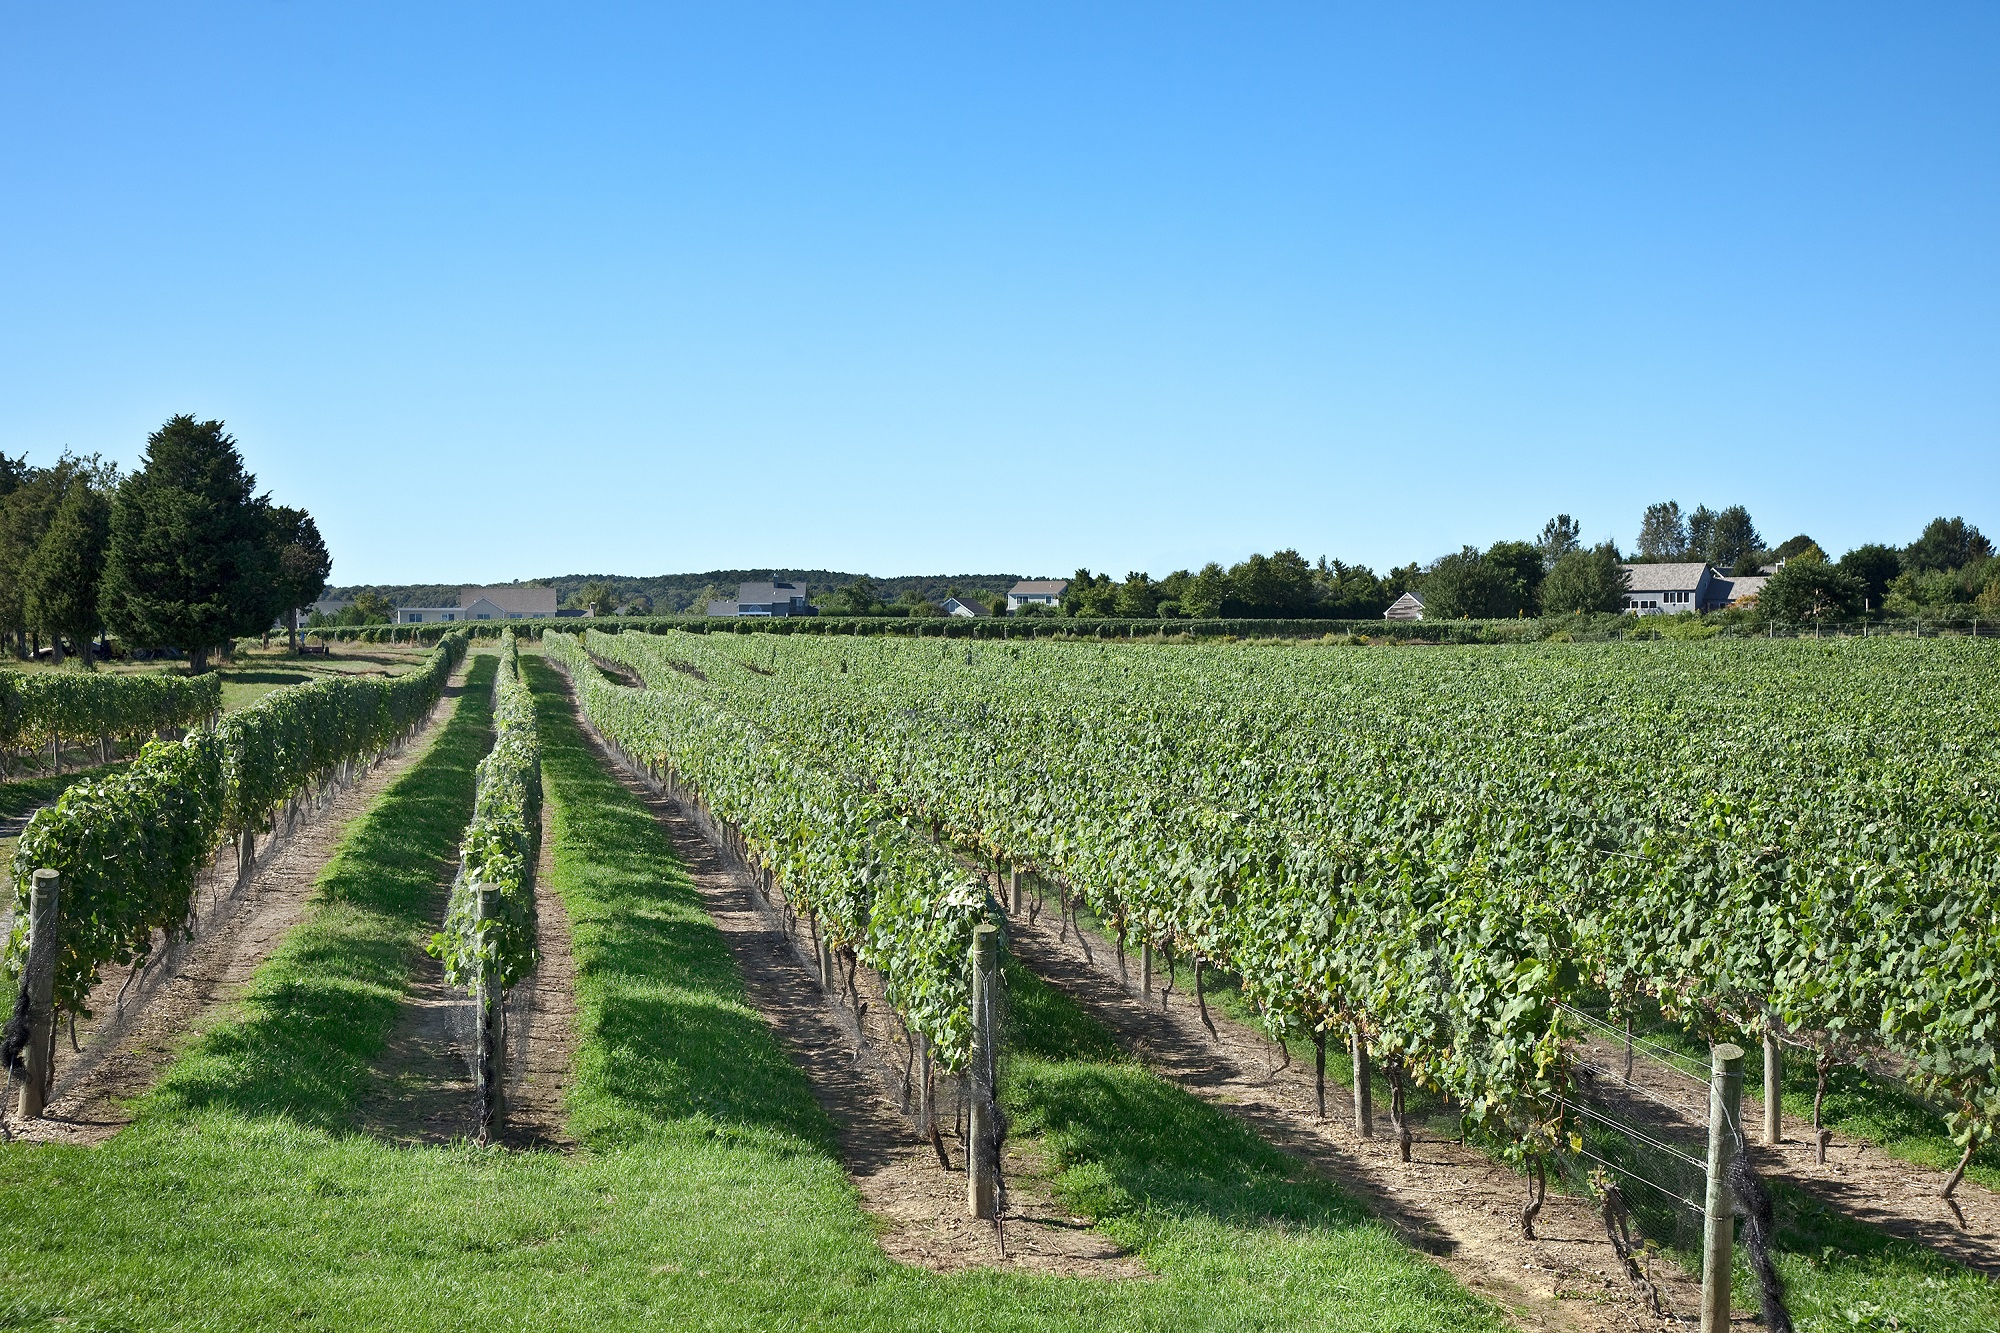 View of a winery and vineyard in Long Island